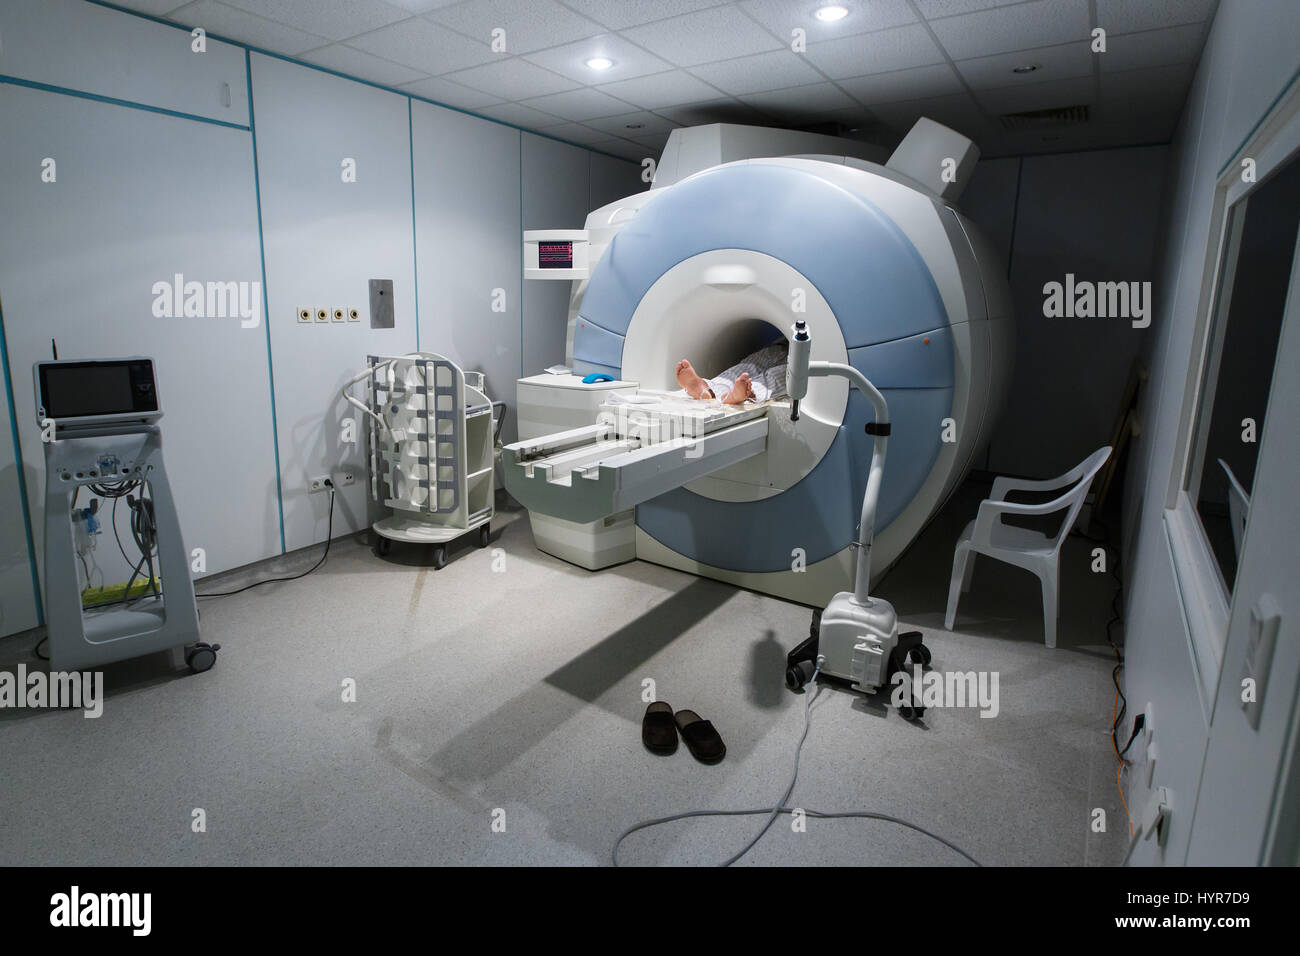 Patient being scanned and diagnosed on a MRI (magnetic resonance imaging) scanner in a hospital. Modern medical equipment, medicine and health care co Stock Photo